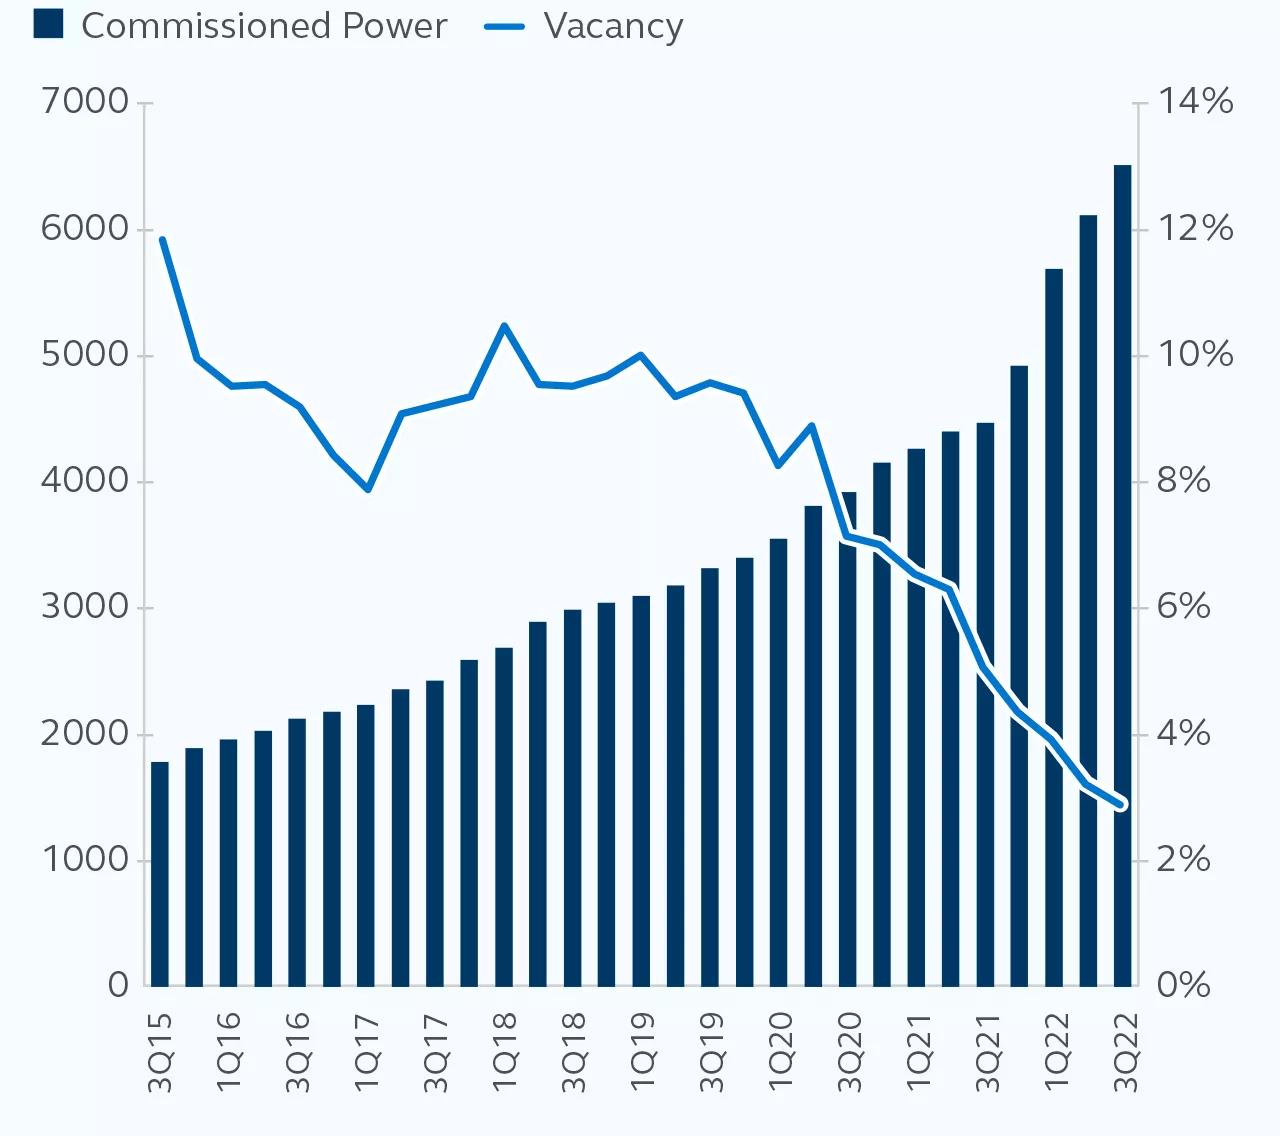 Line graph of commissioned power vs. vacancy from 2015 to Q3 2022